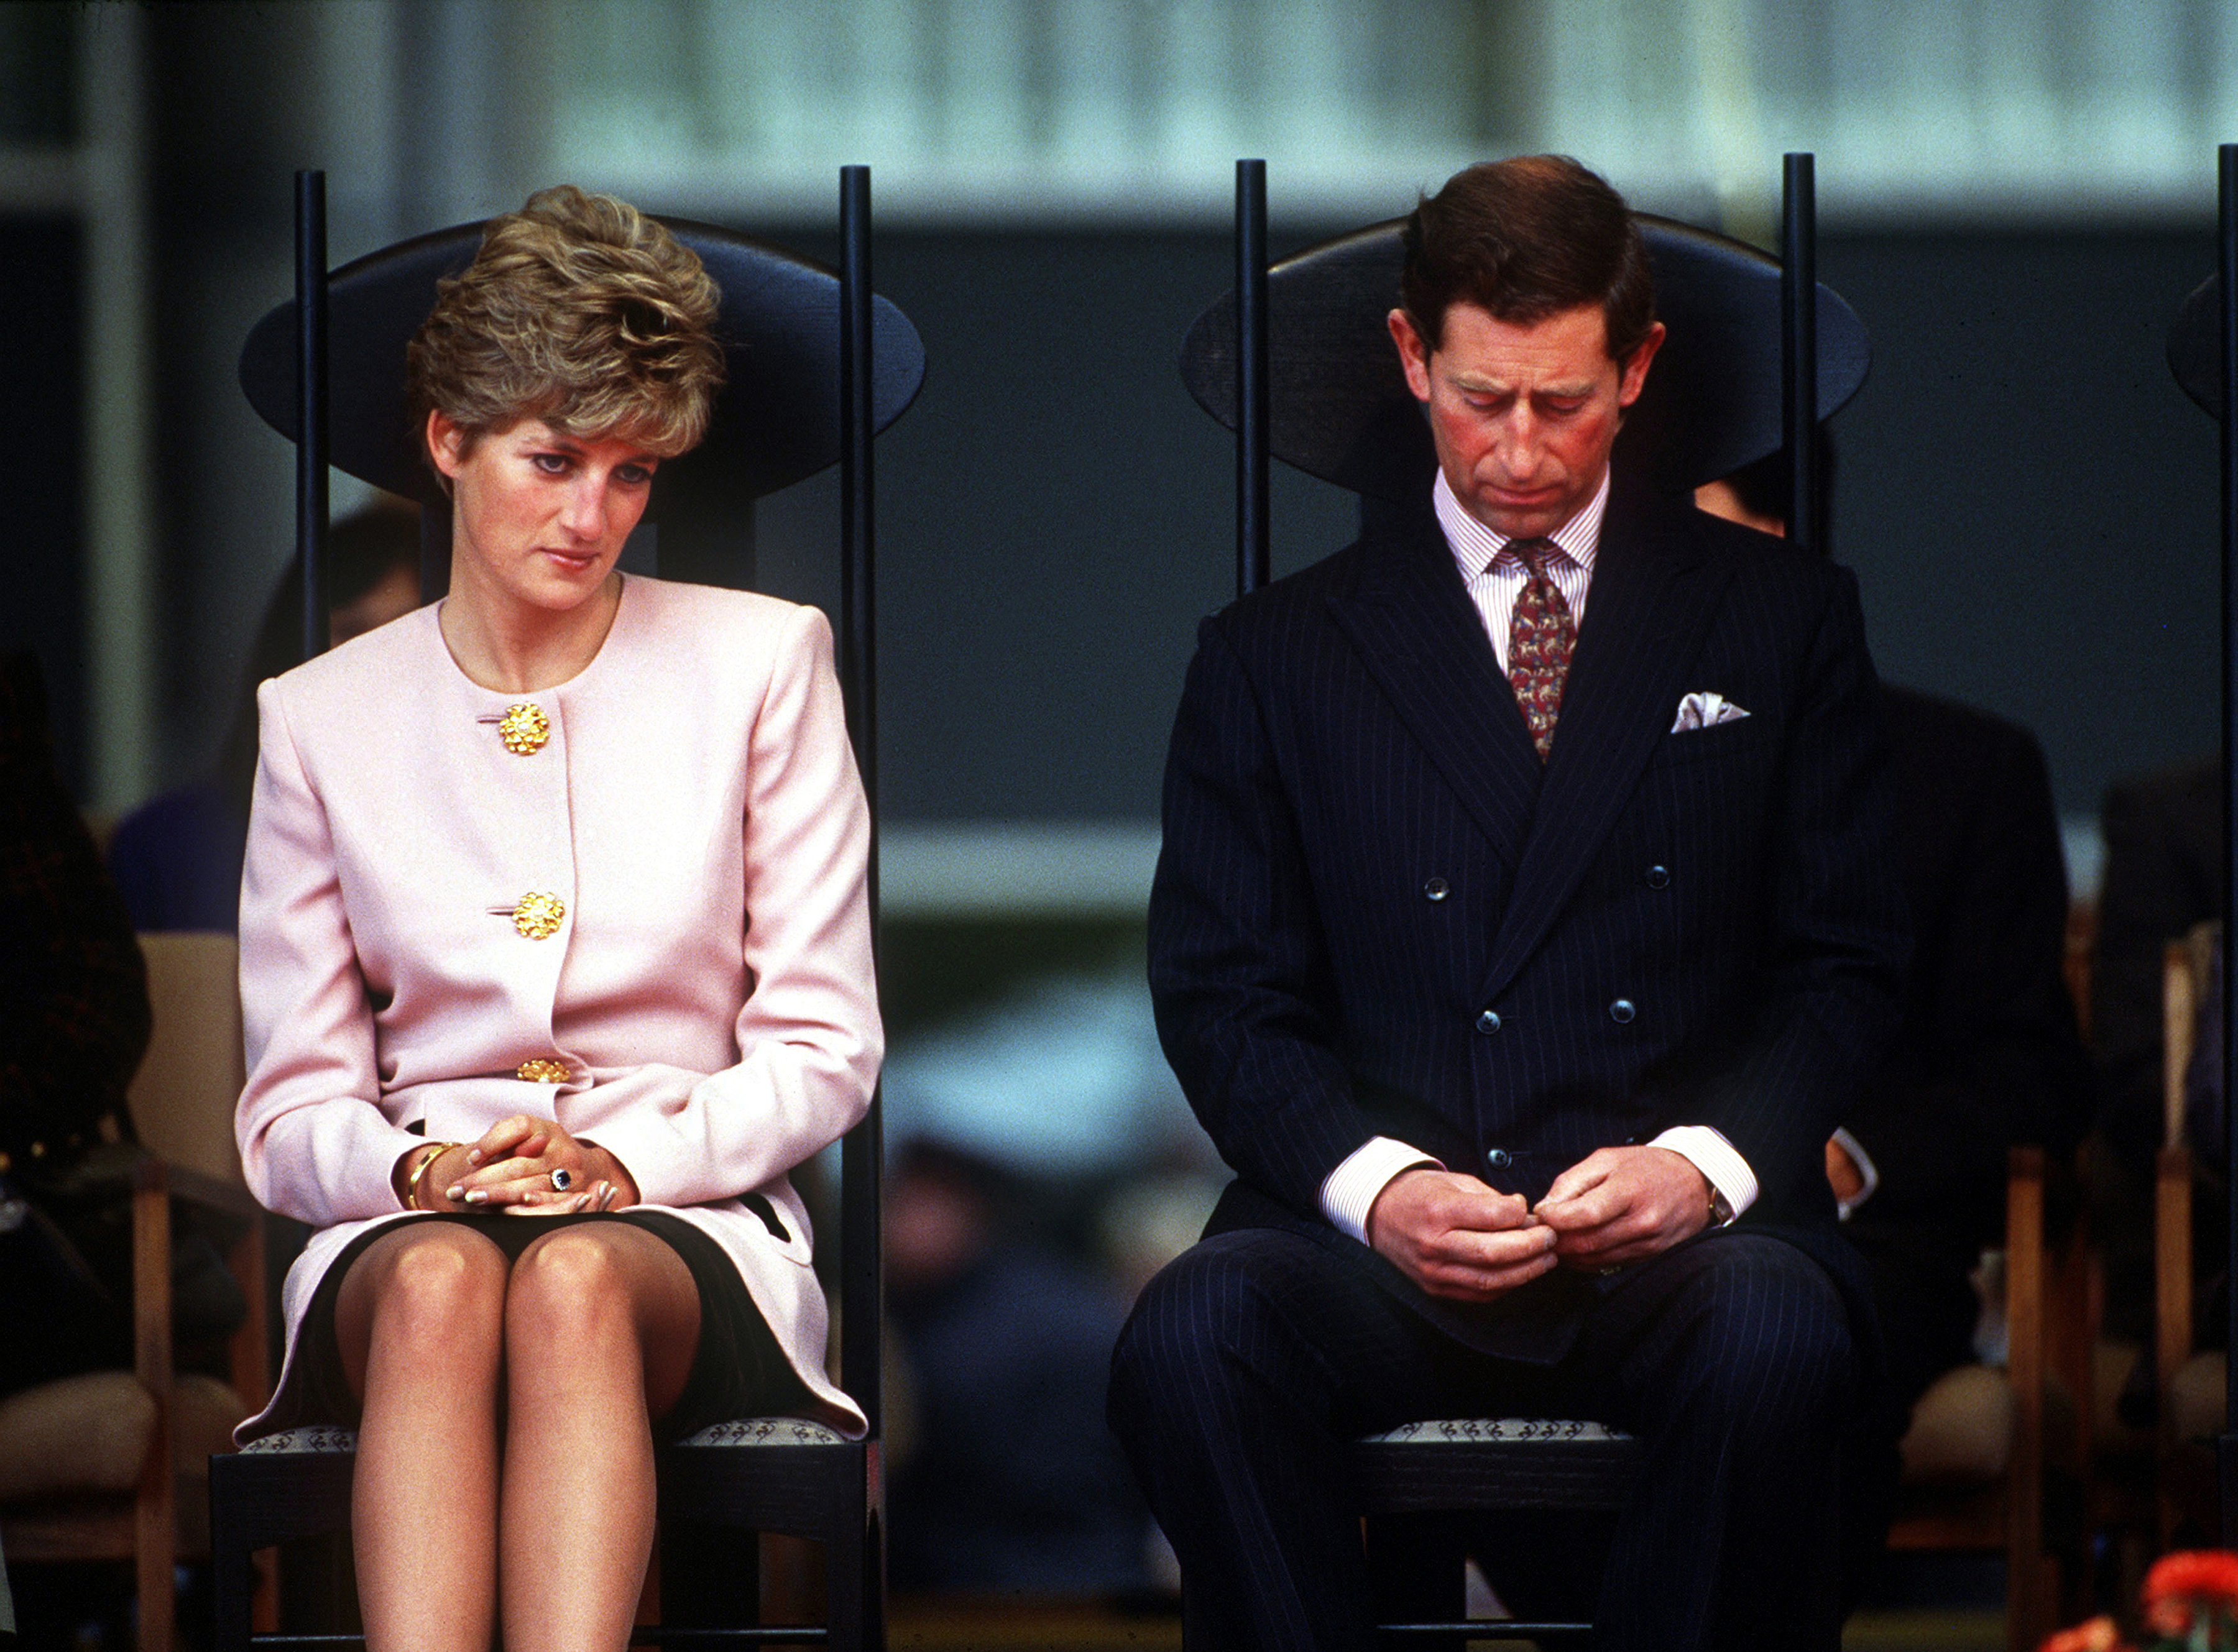 The late Princess Diana and King Charles III during their Canadian tour in October, 1991. | Source: Getty Images